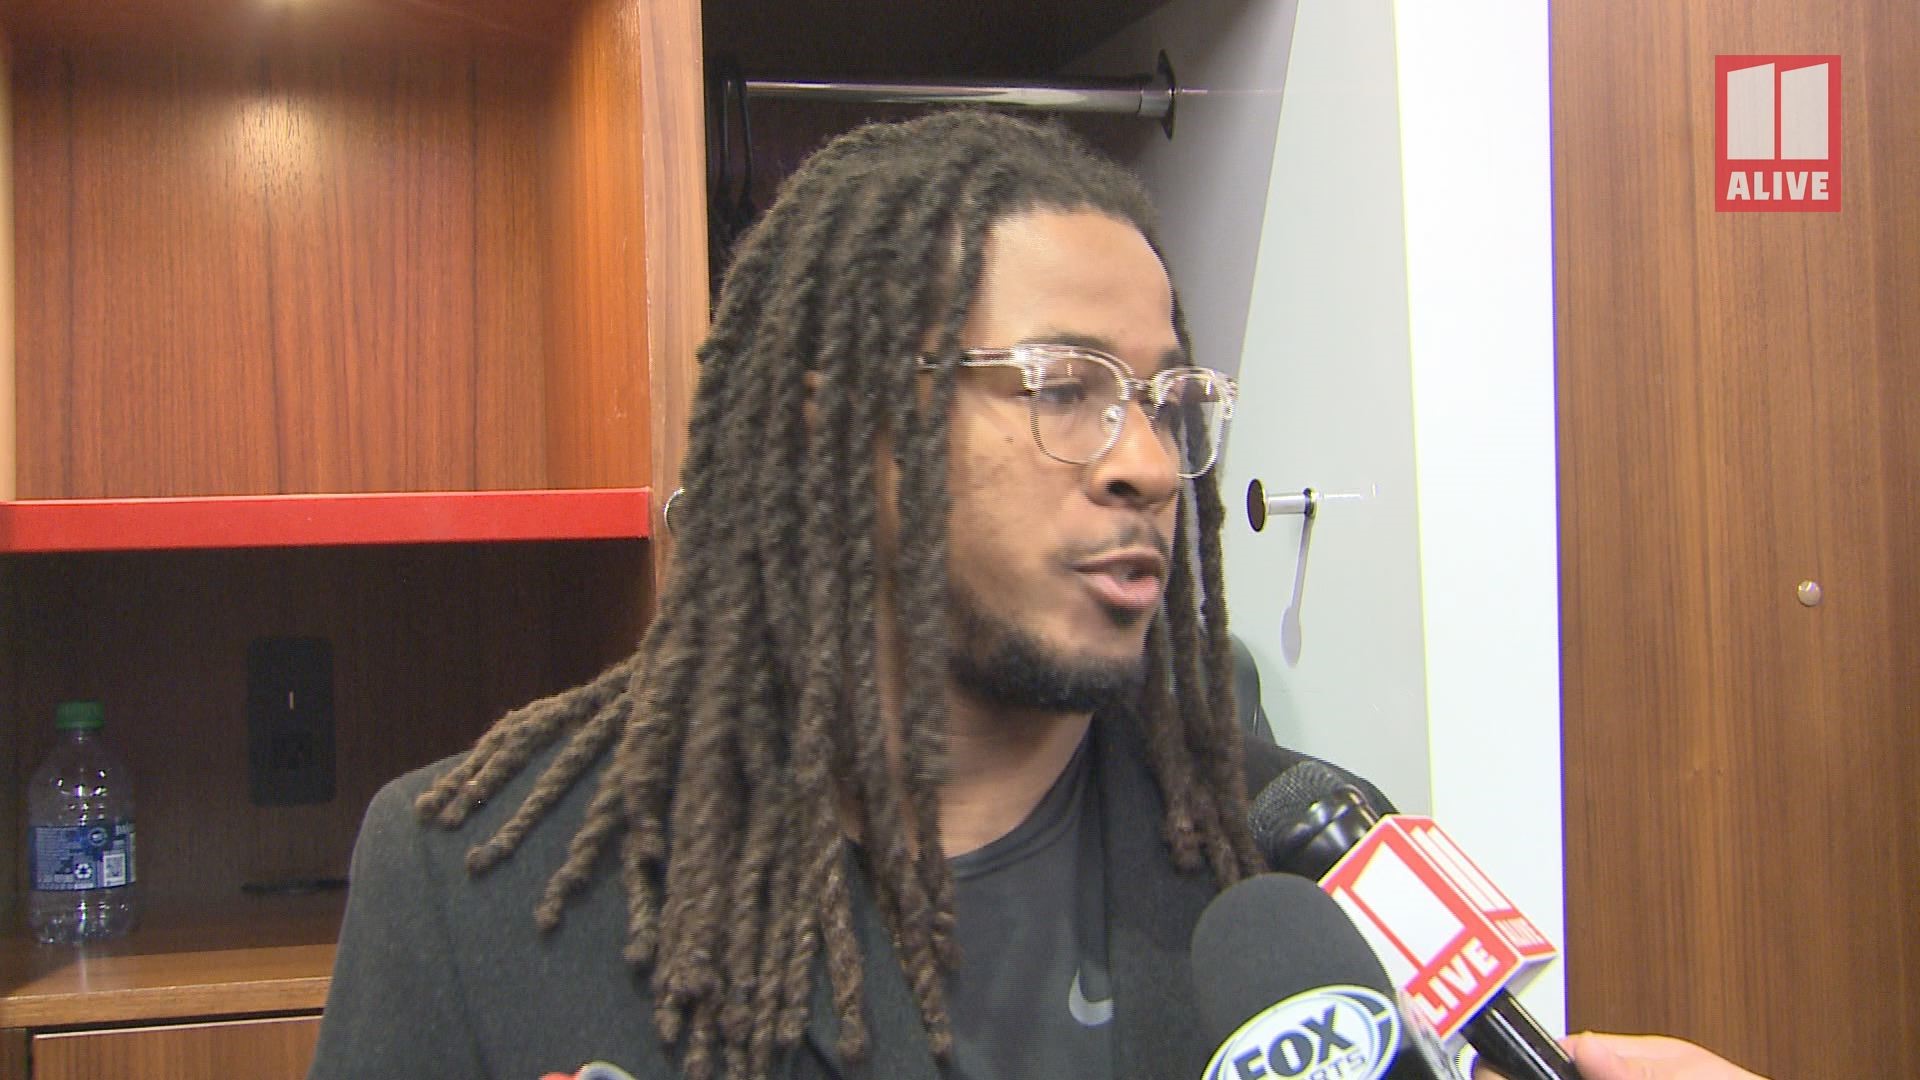 The Atlanta Falcons running back spoke to 11Alive Sports in the locker room after a win against the Jacksonville Jaguars in the team's final home game of the season.